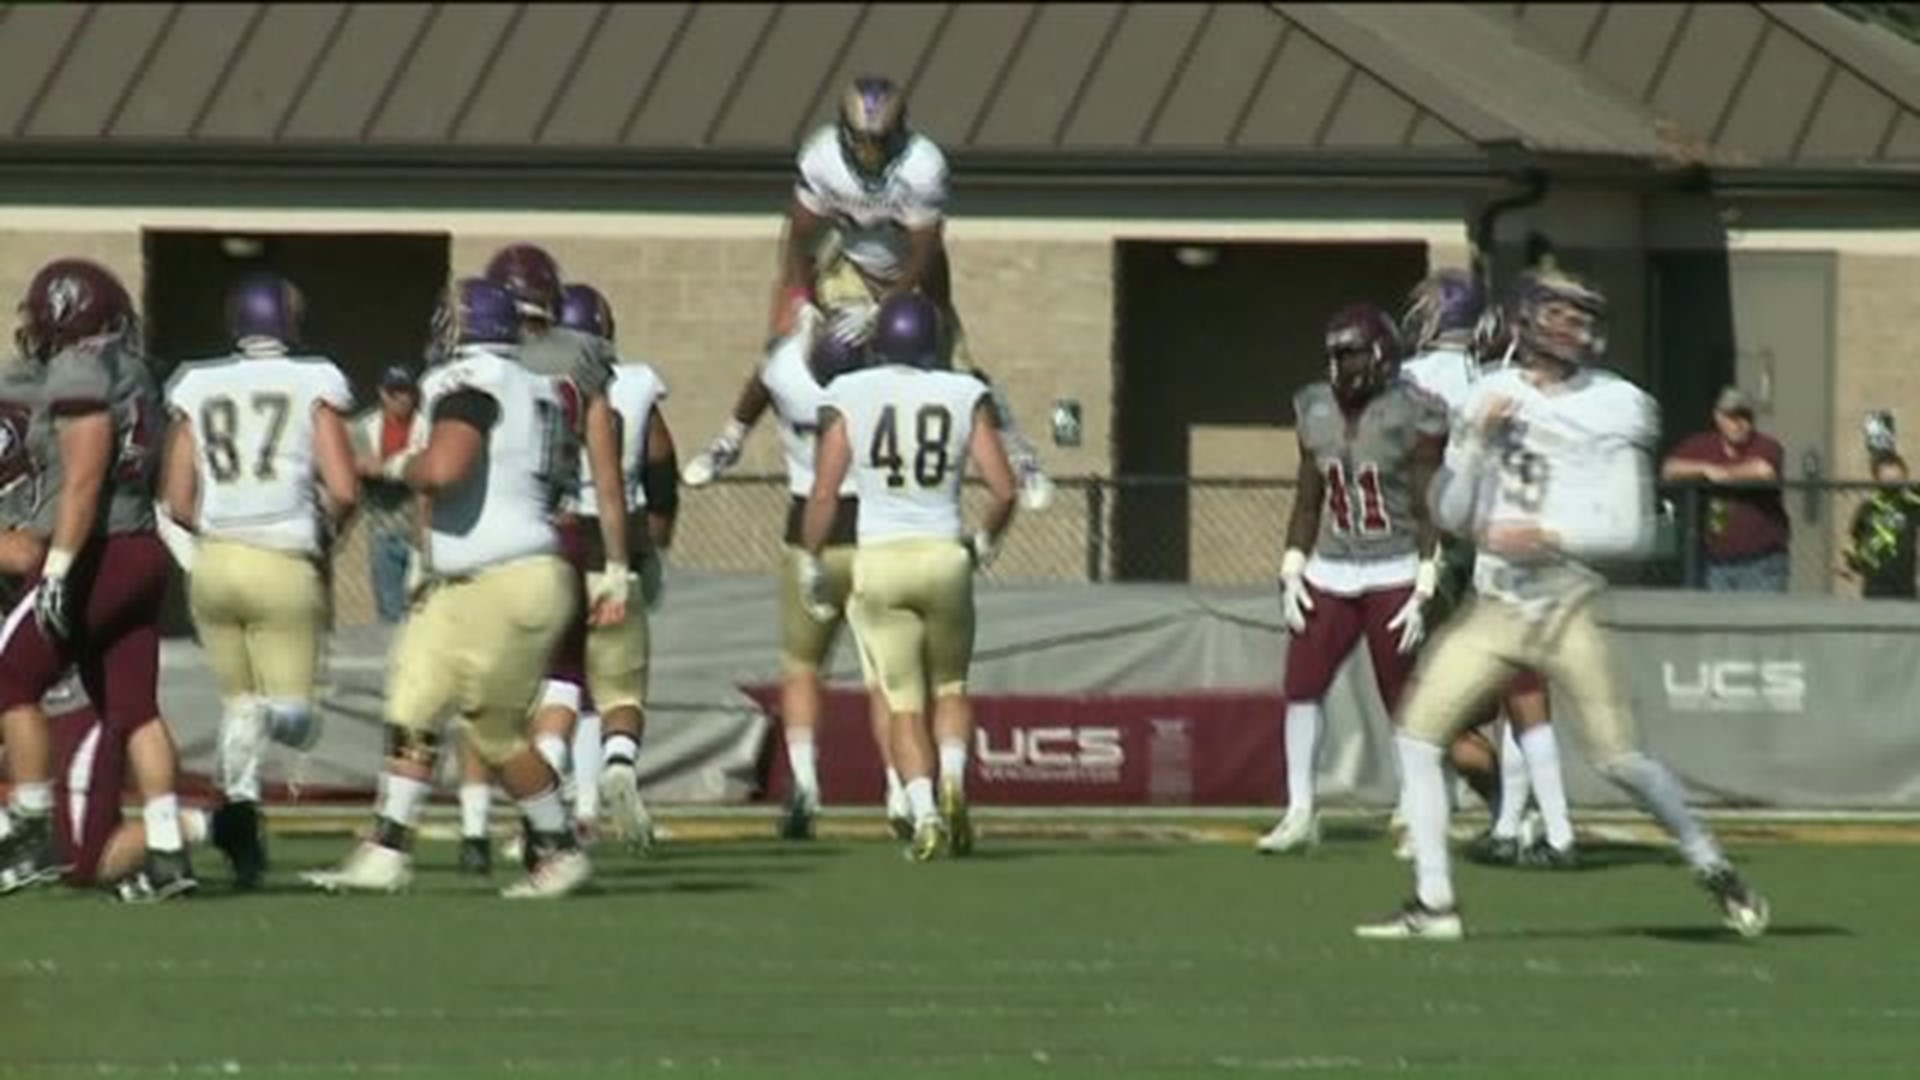 Bloomsburg Falls to West Chester 27-7